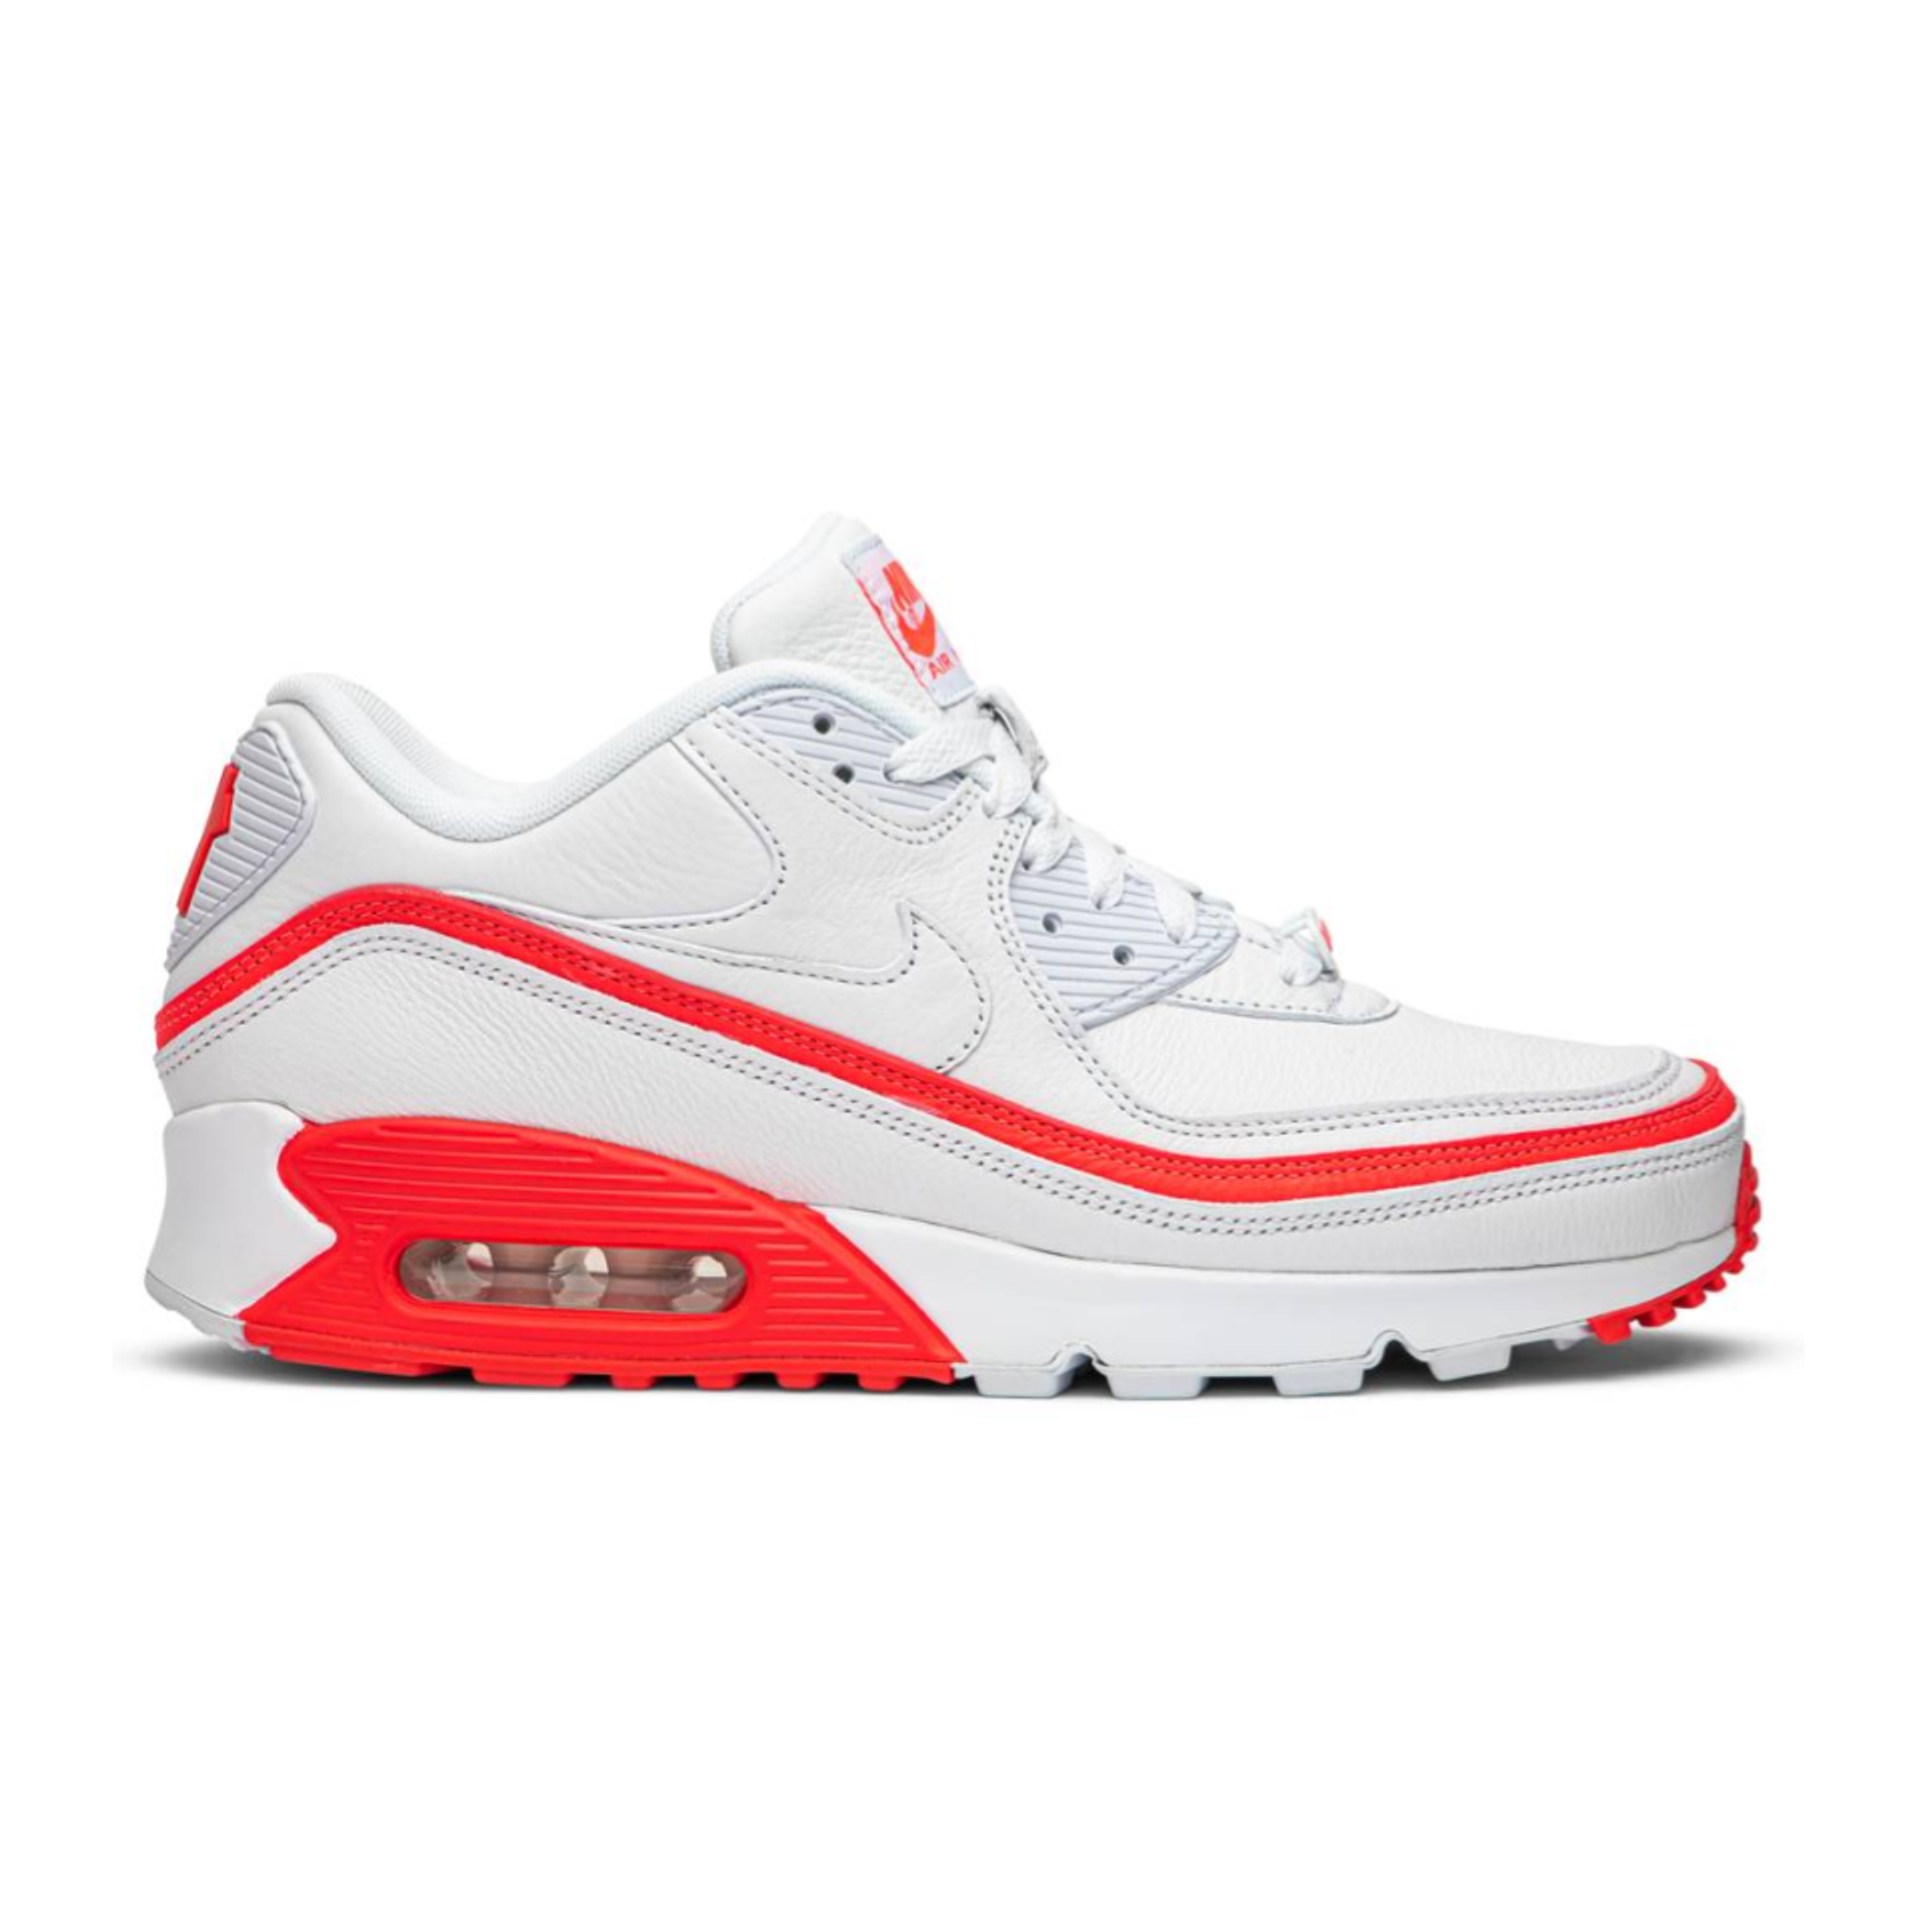 Nike Undefeated x Air Max 90 'White Solar Red'